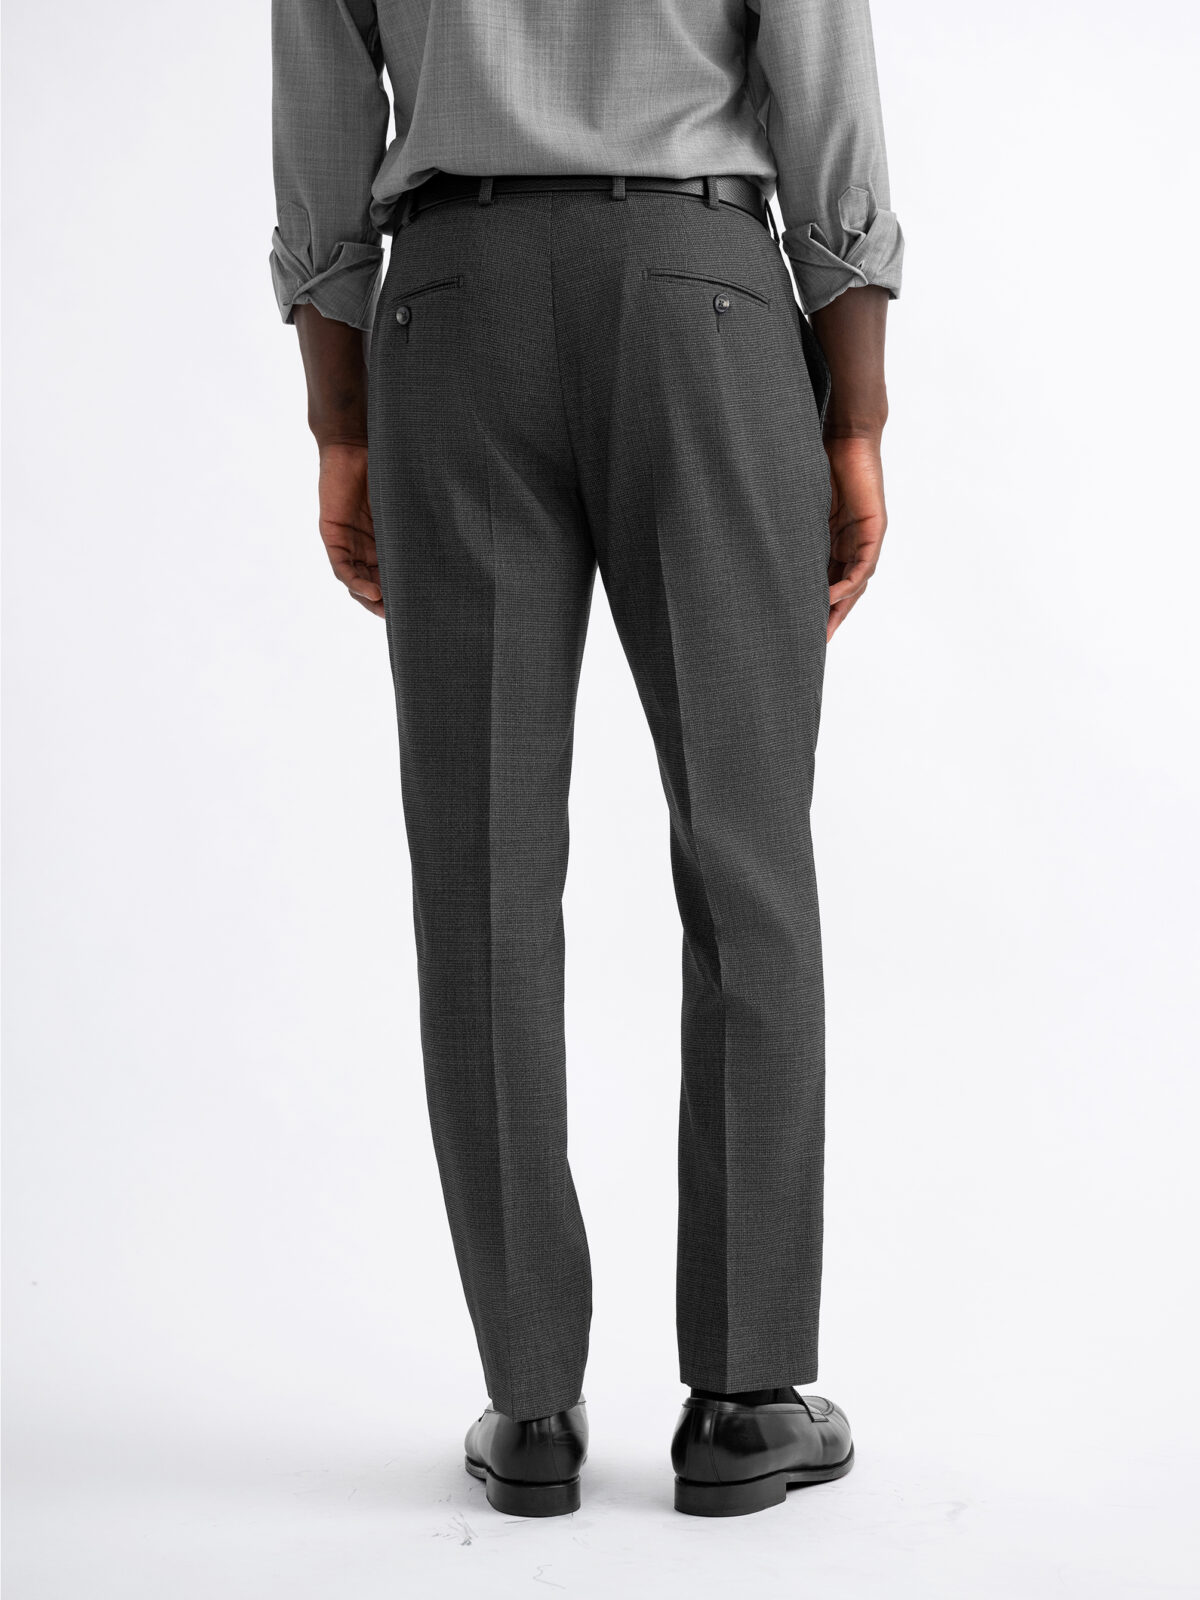 Medium Grey Suit | Buy A Modern Grey Wool Suit For Men From Tomasso Black –  Tomasso Black